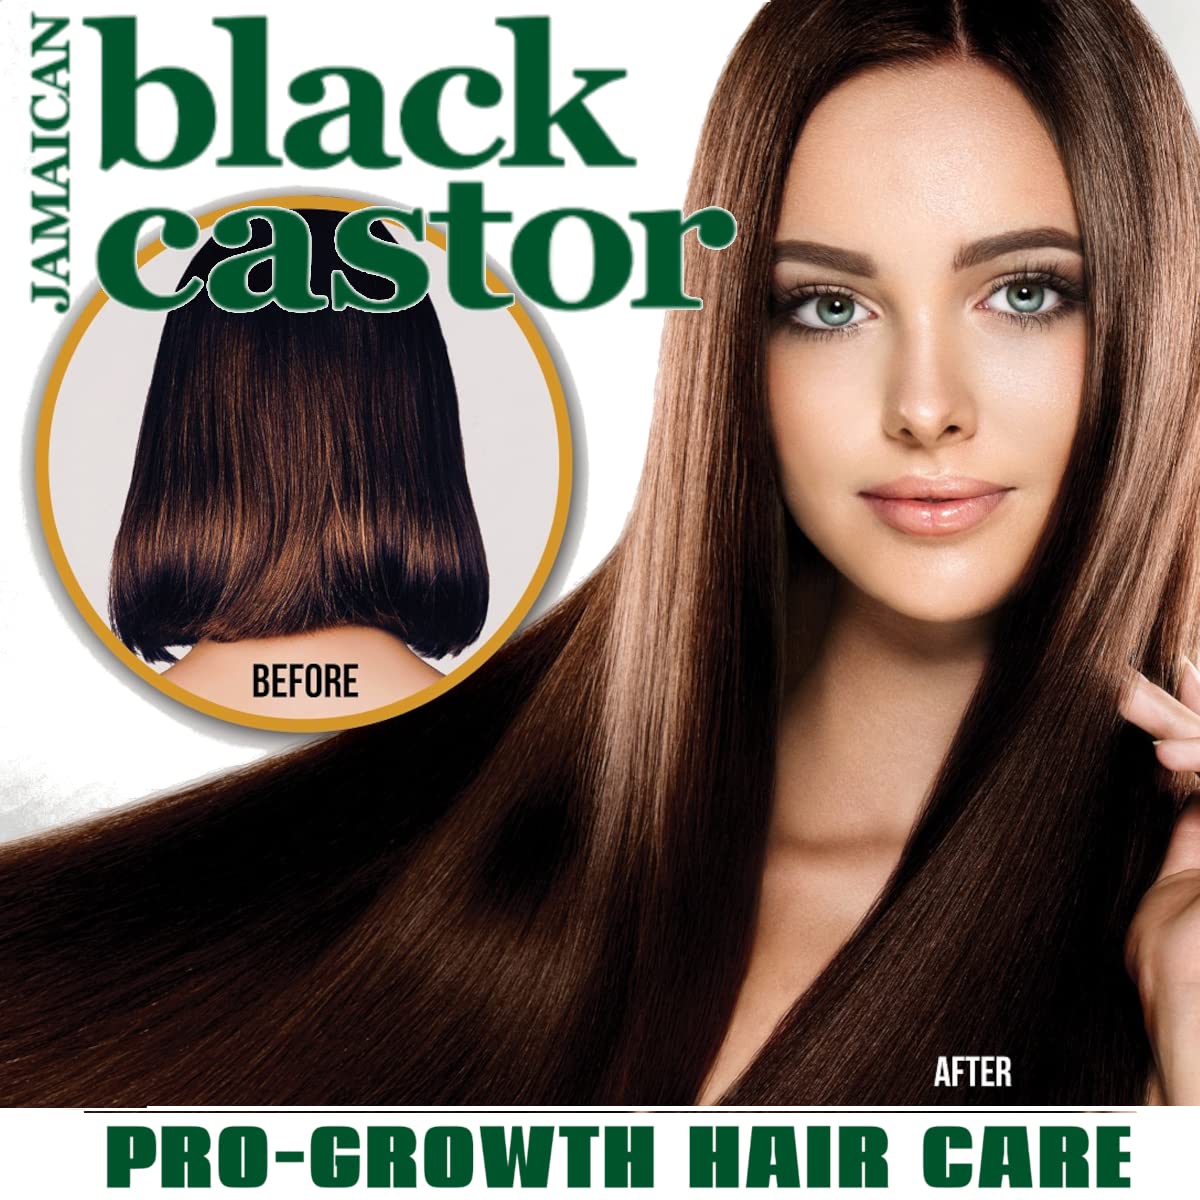 Hair Chemist Superior Growth Jamaican Black Castor Conditioner 33.8 oz. - Sulfate Free Conditioner made with Natural Ingredients